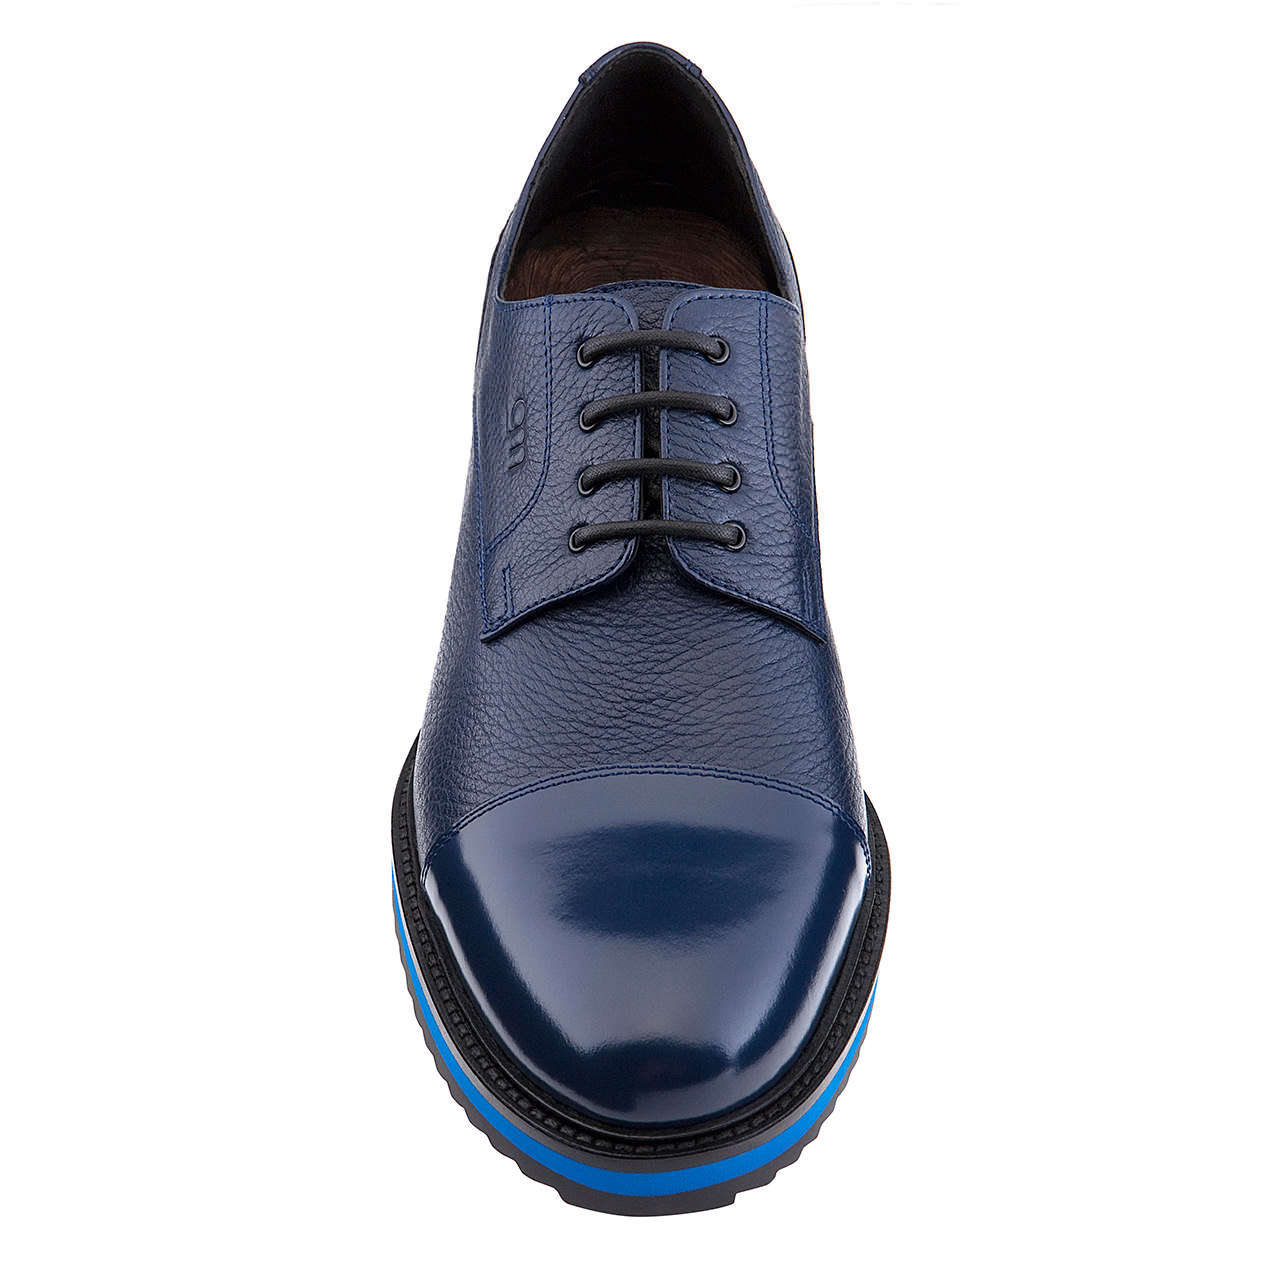 Elevator Shoes Nice | Guidomaggi taller shoes